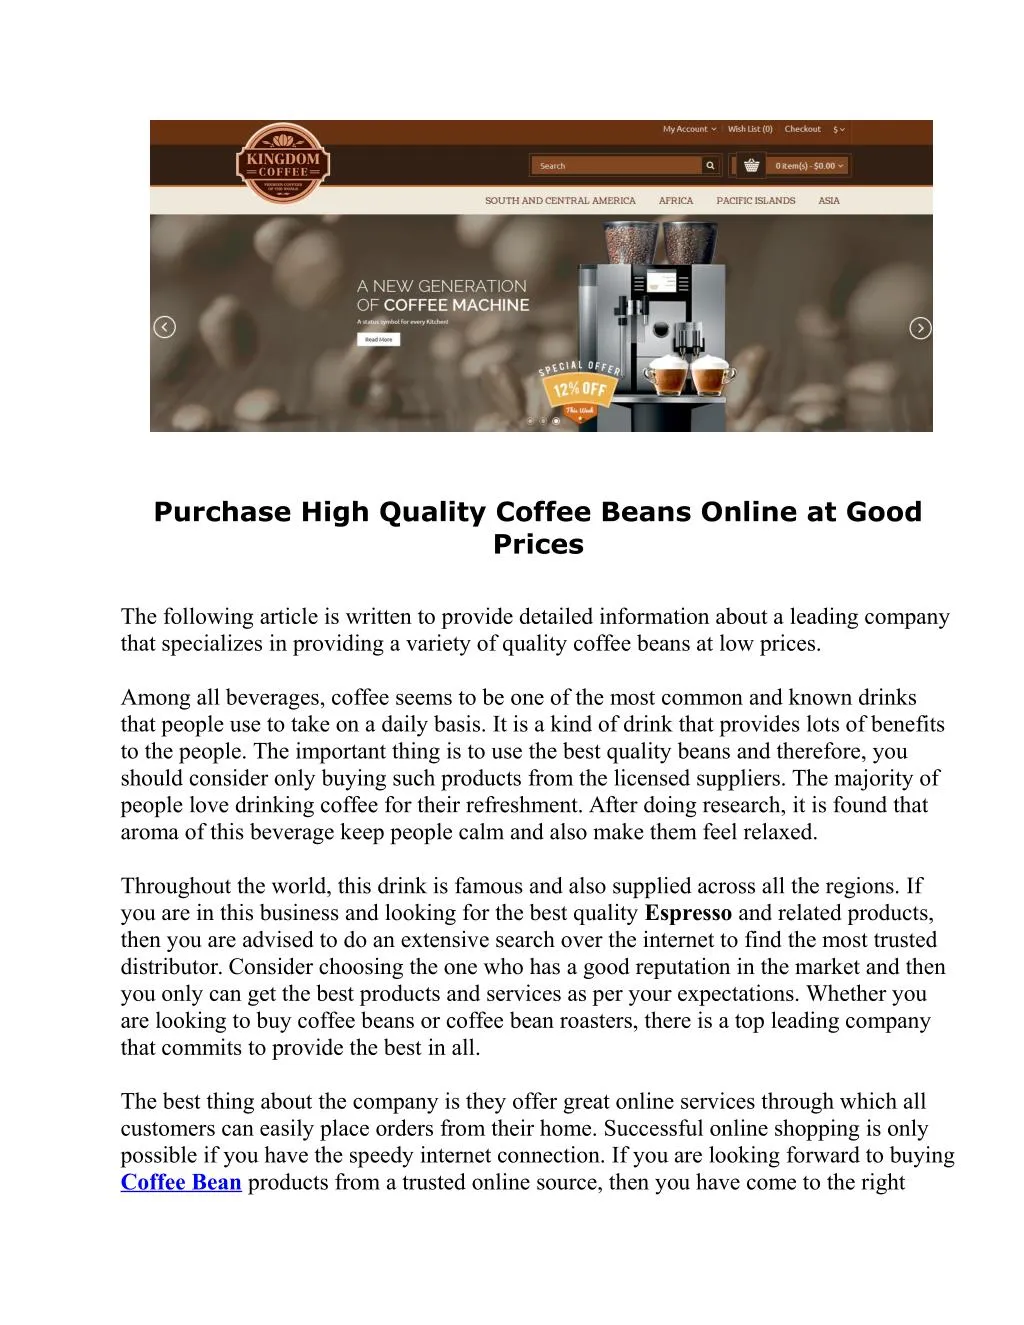 purchase high quality coffee beans online at good